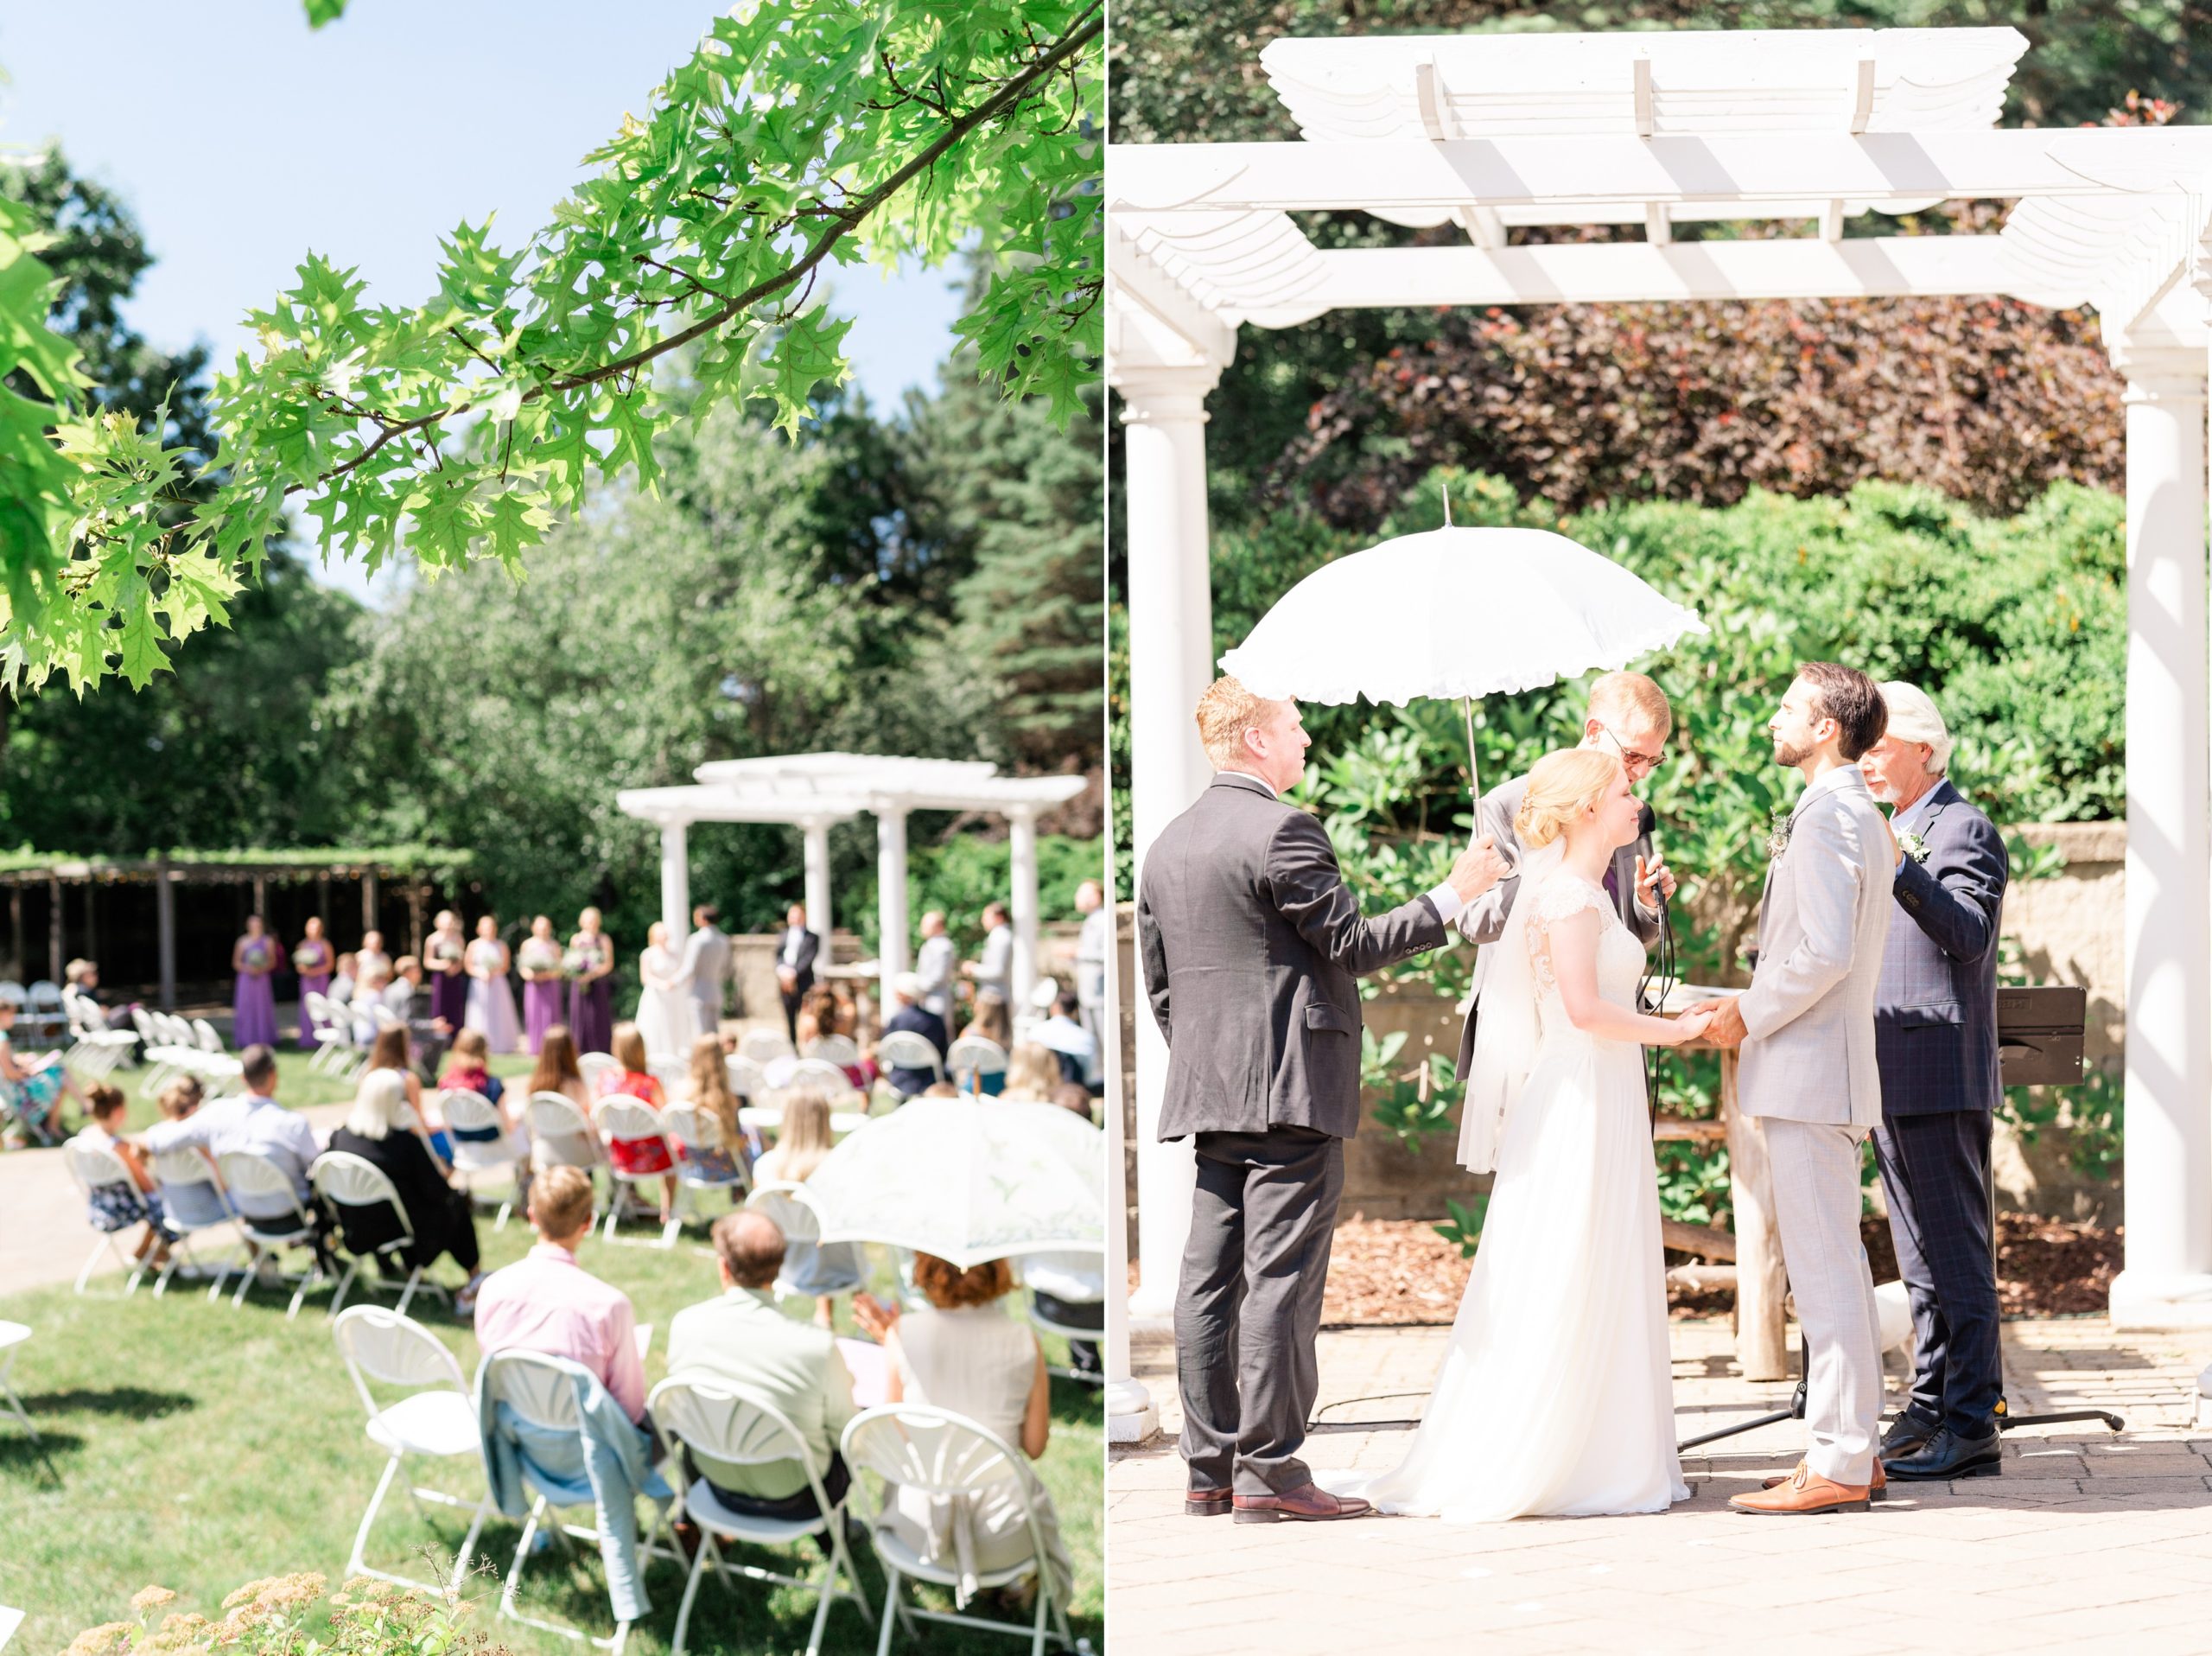 Sunny june wedding ceremony at the Gardens of Castle Rock